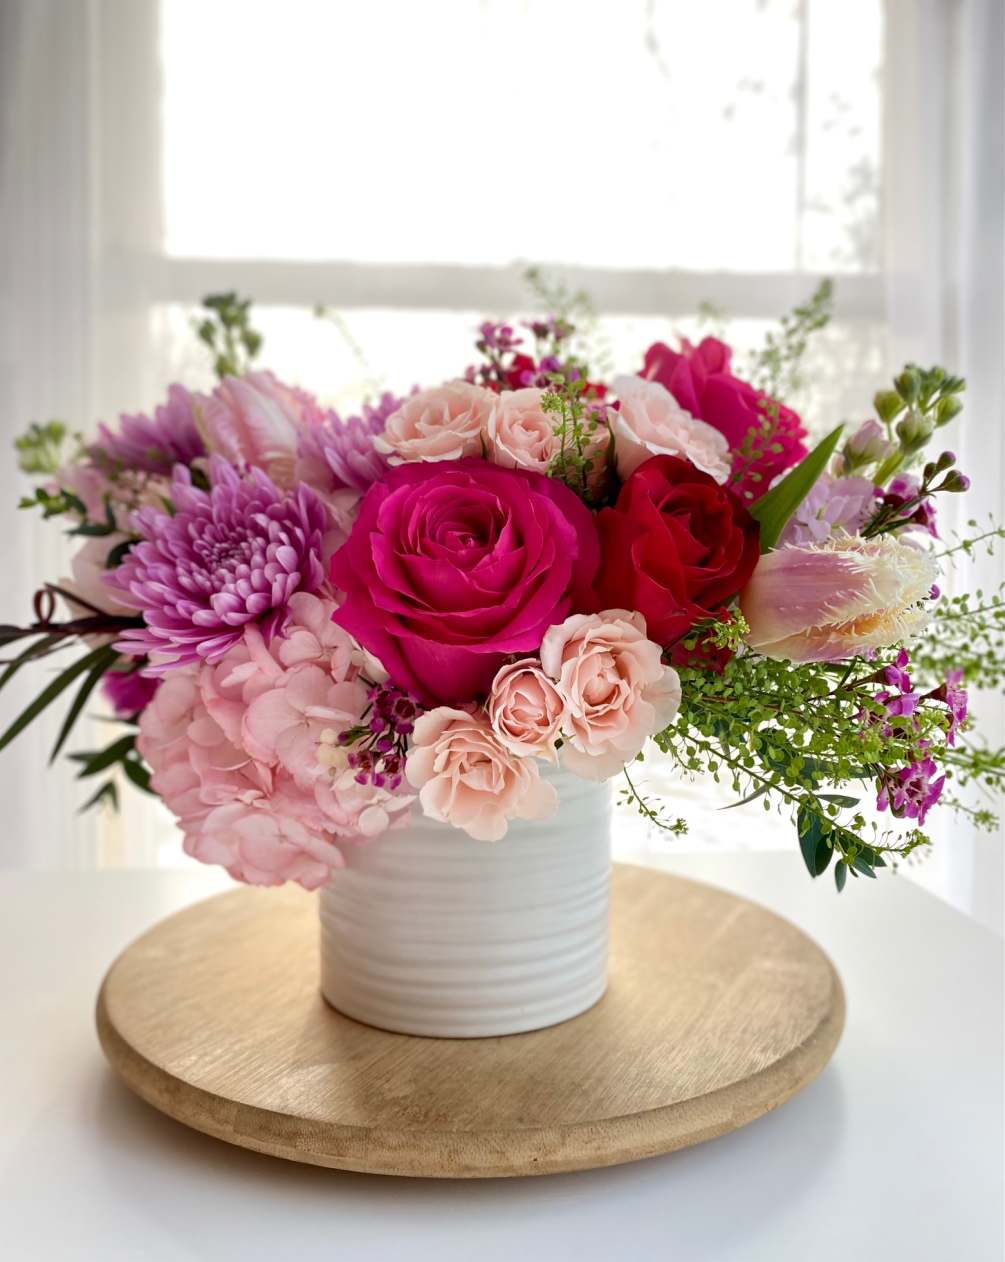 This arrangement reminds us of these words: 
&quot;the way she&#039;s such a